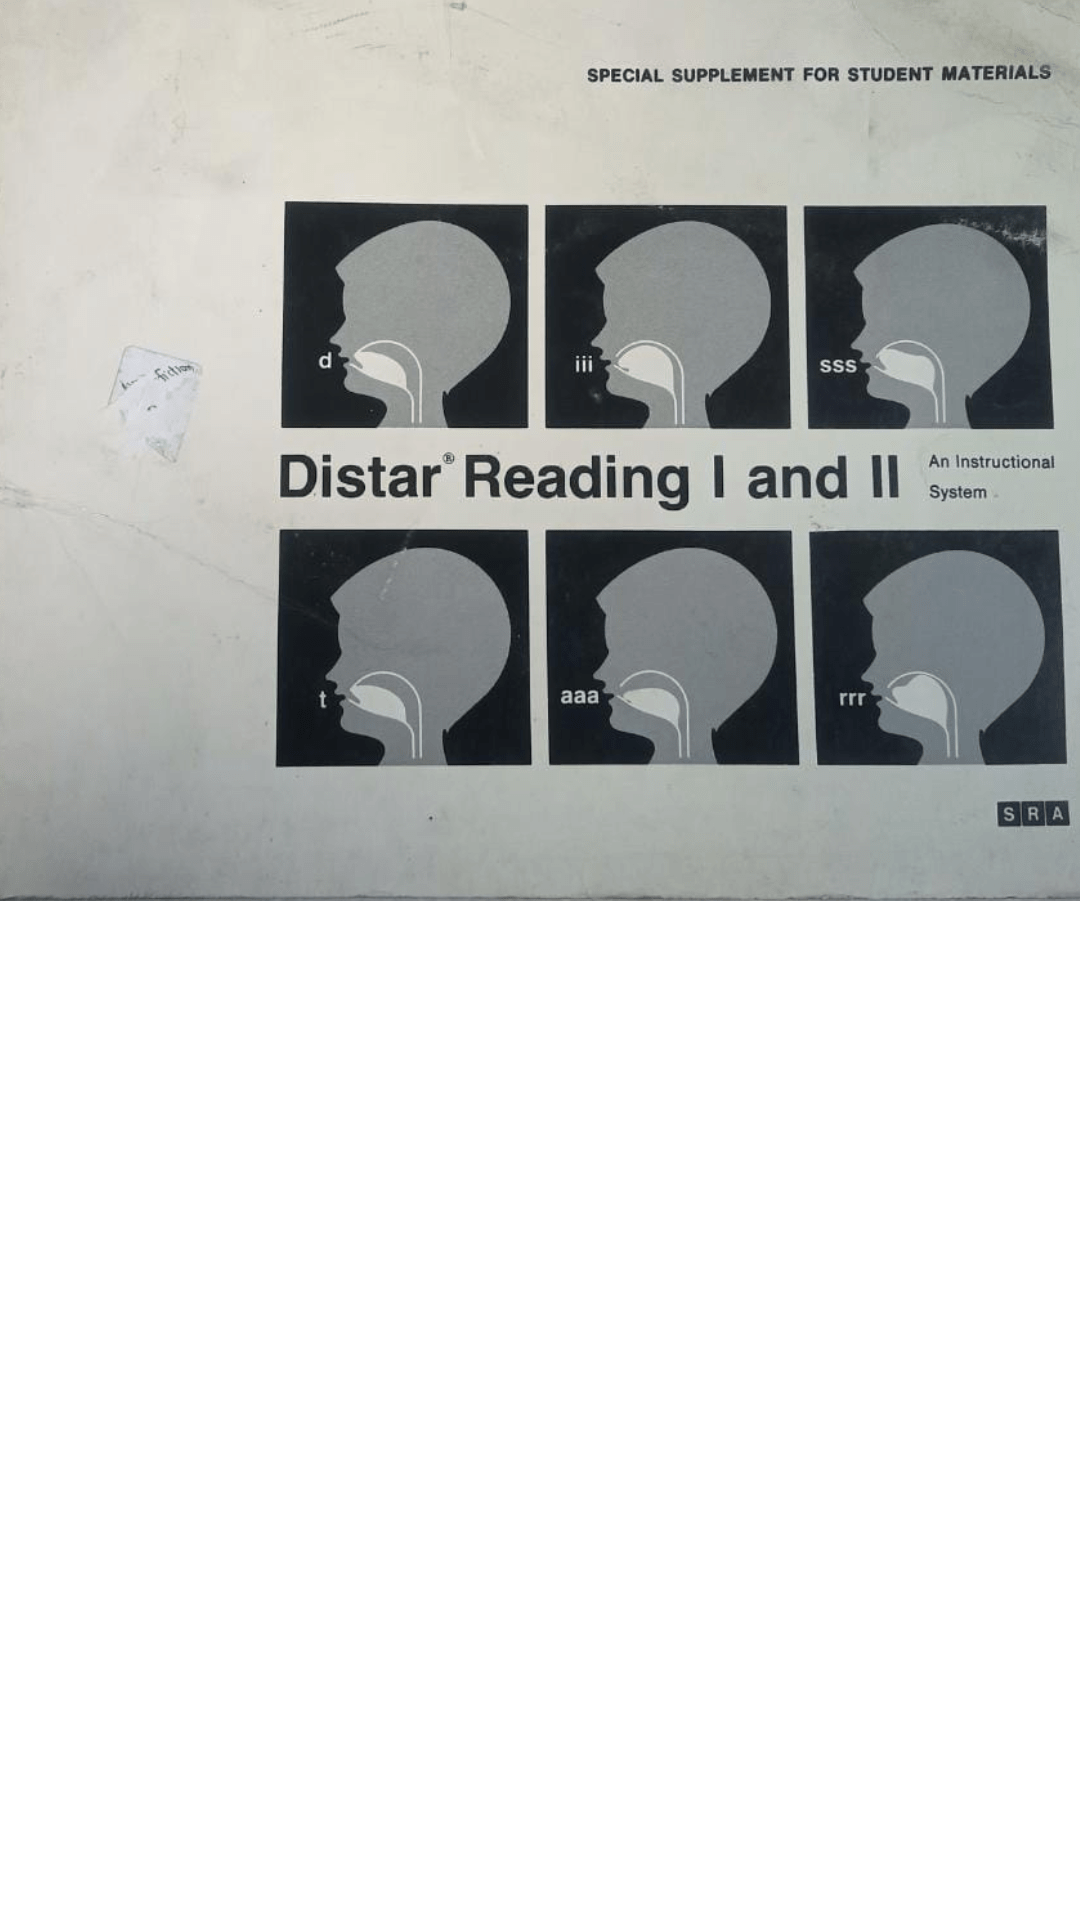 Distar Reading I and II: An Instructional System